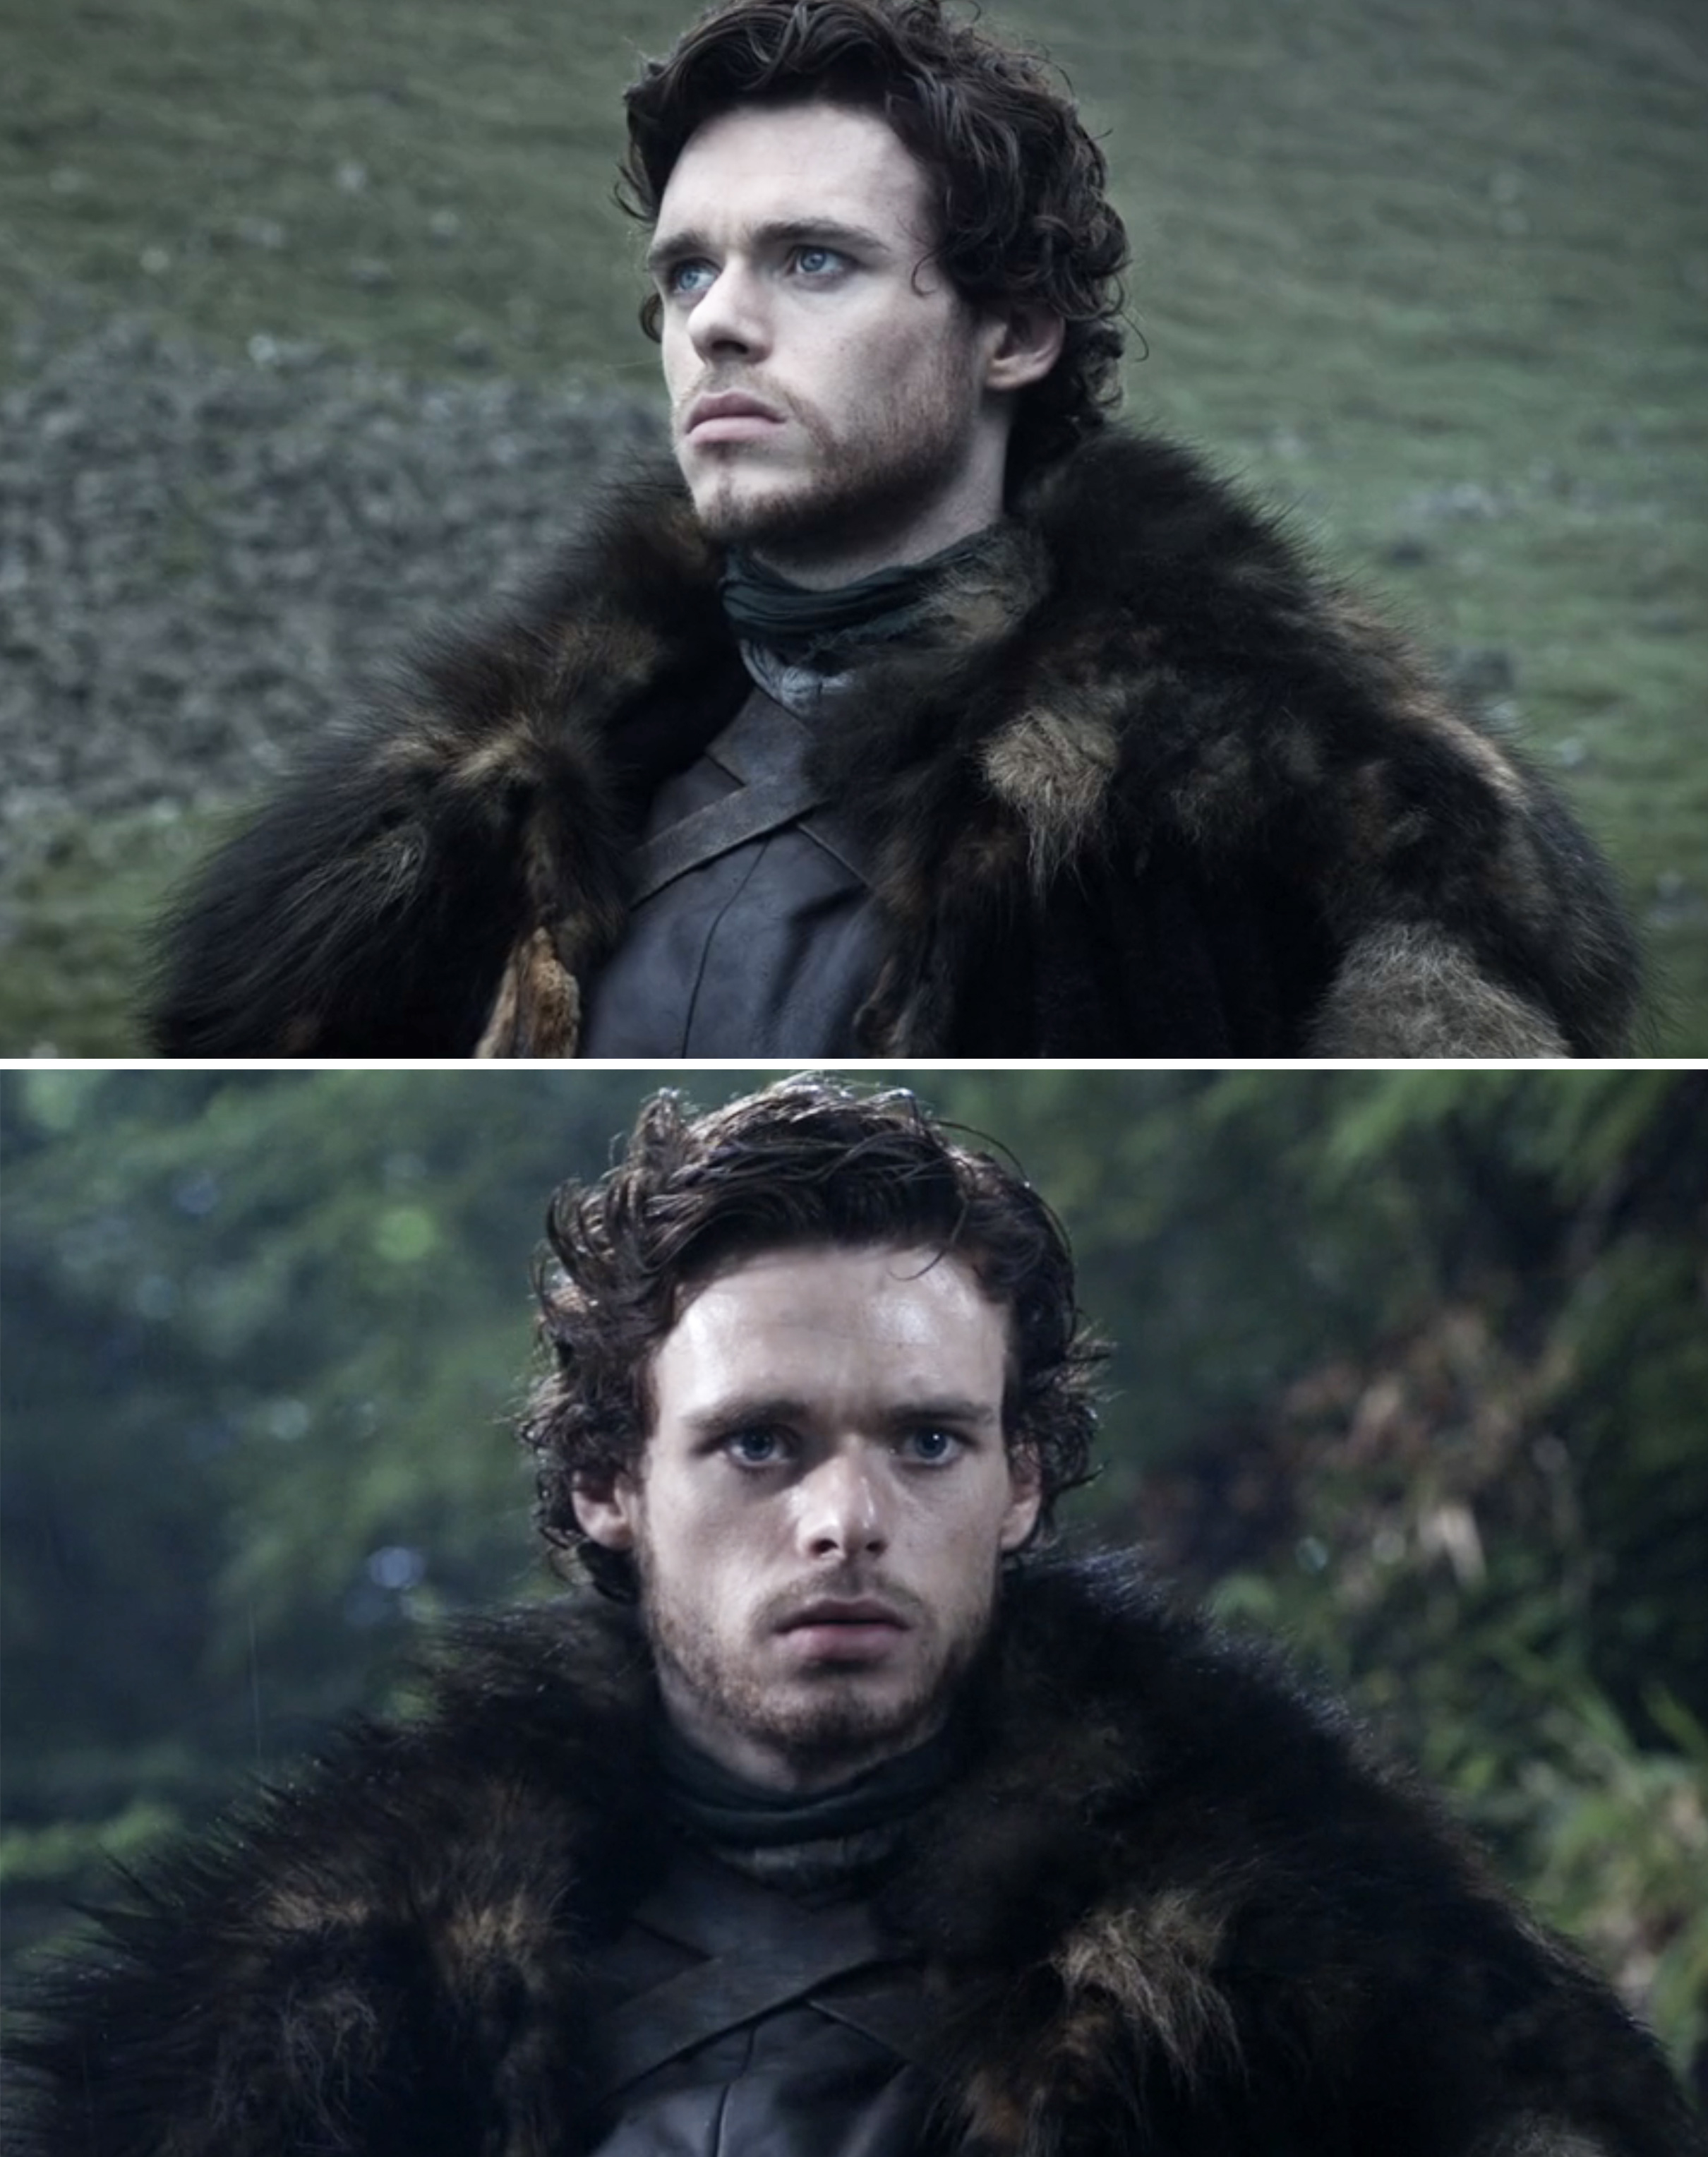 Robb Stark from Game of Thrones wearing a fur cloak, looking contemplative in outdoor settings